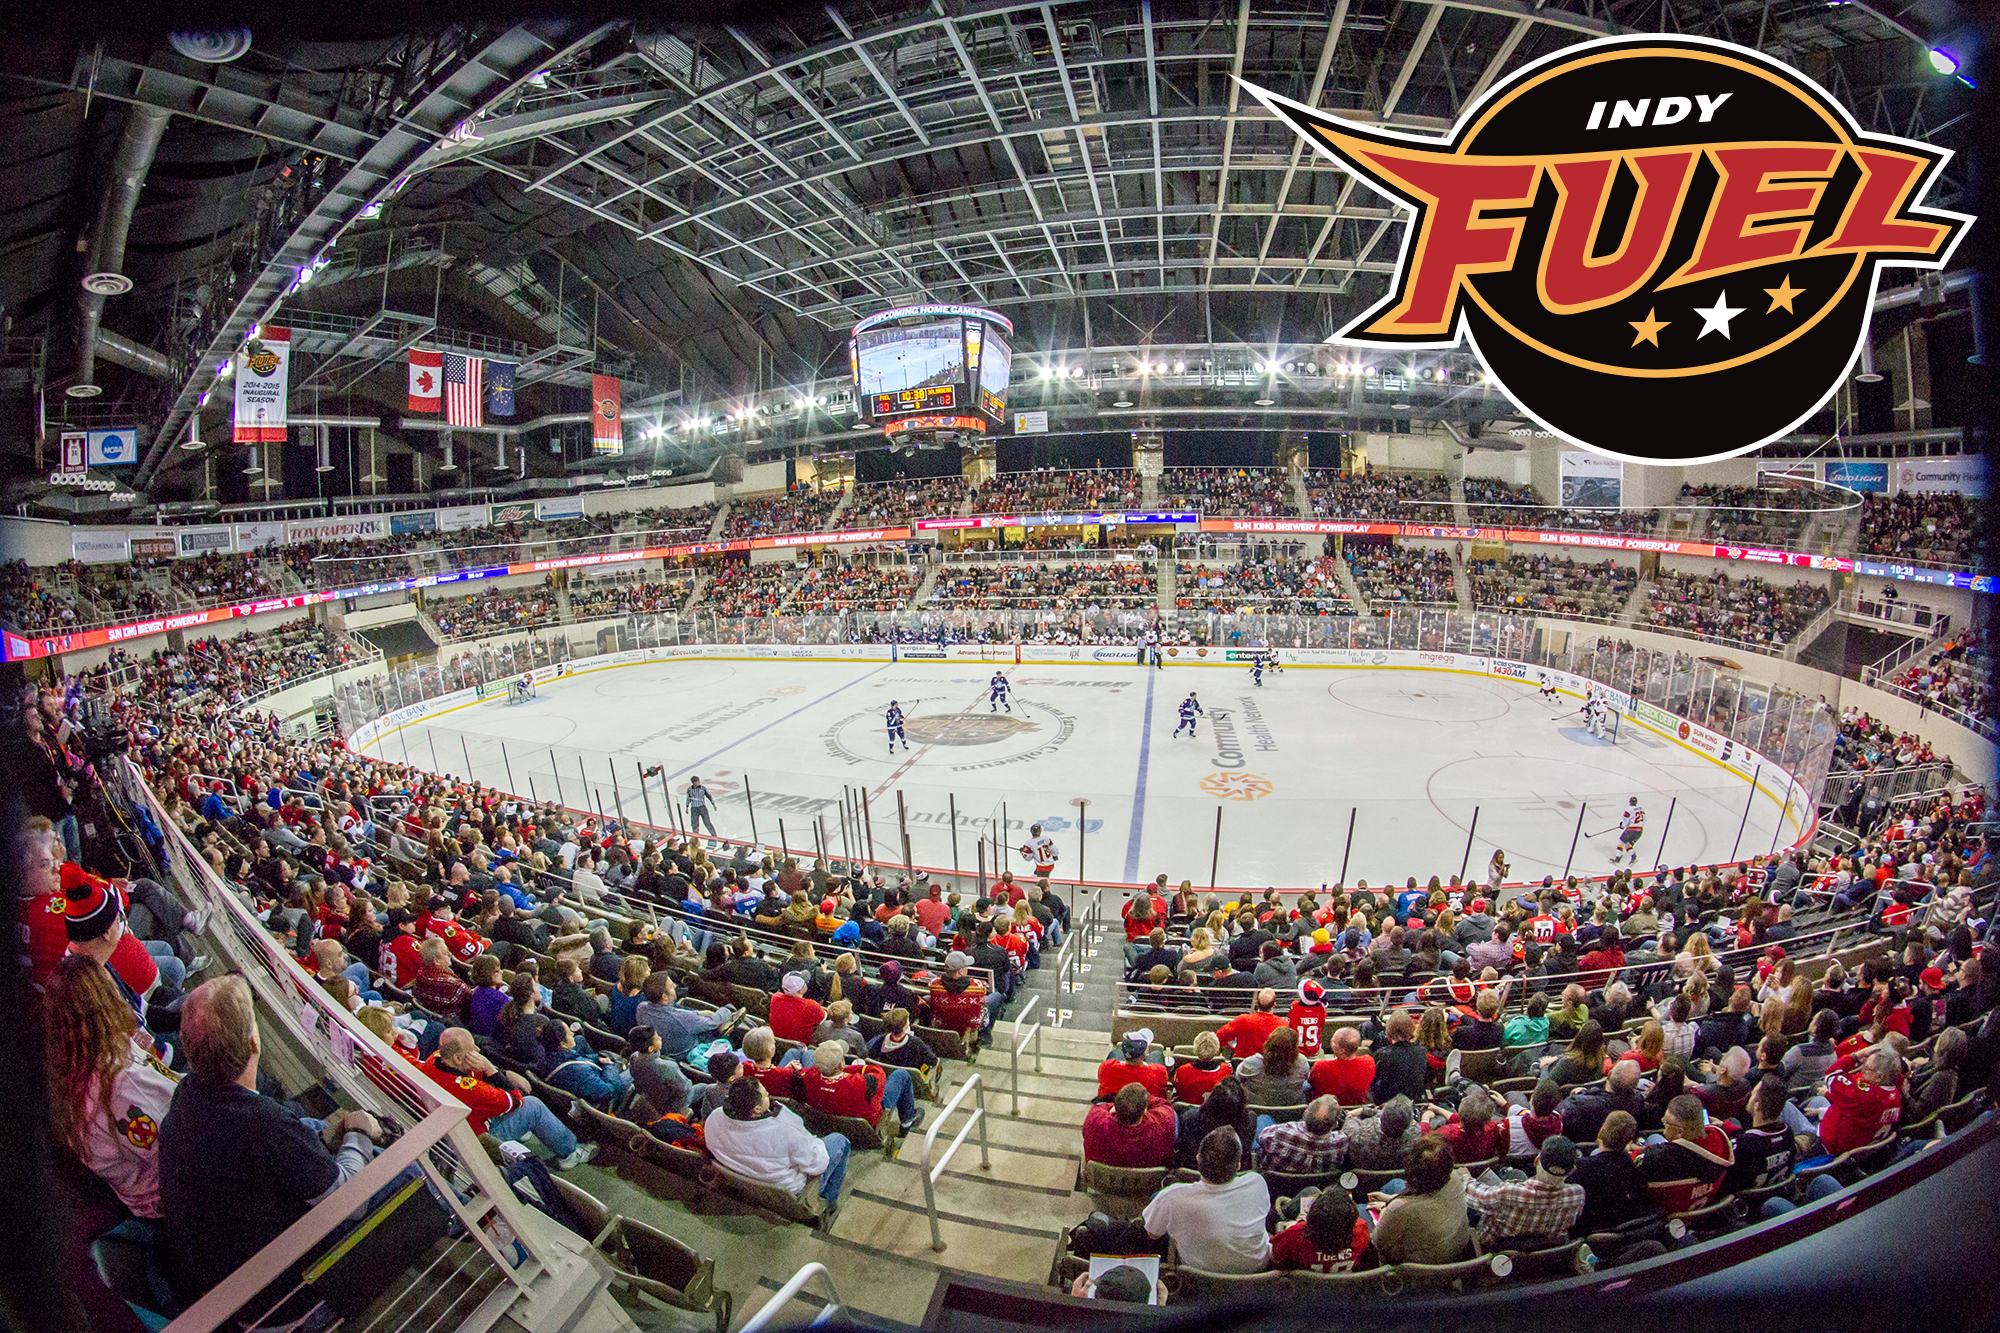 Indy Fuel, Indianapolis, IN Professional Hockey